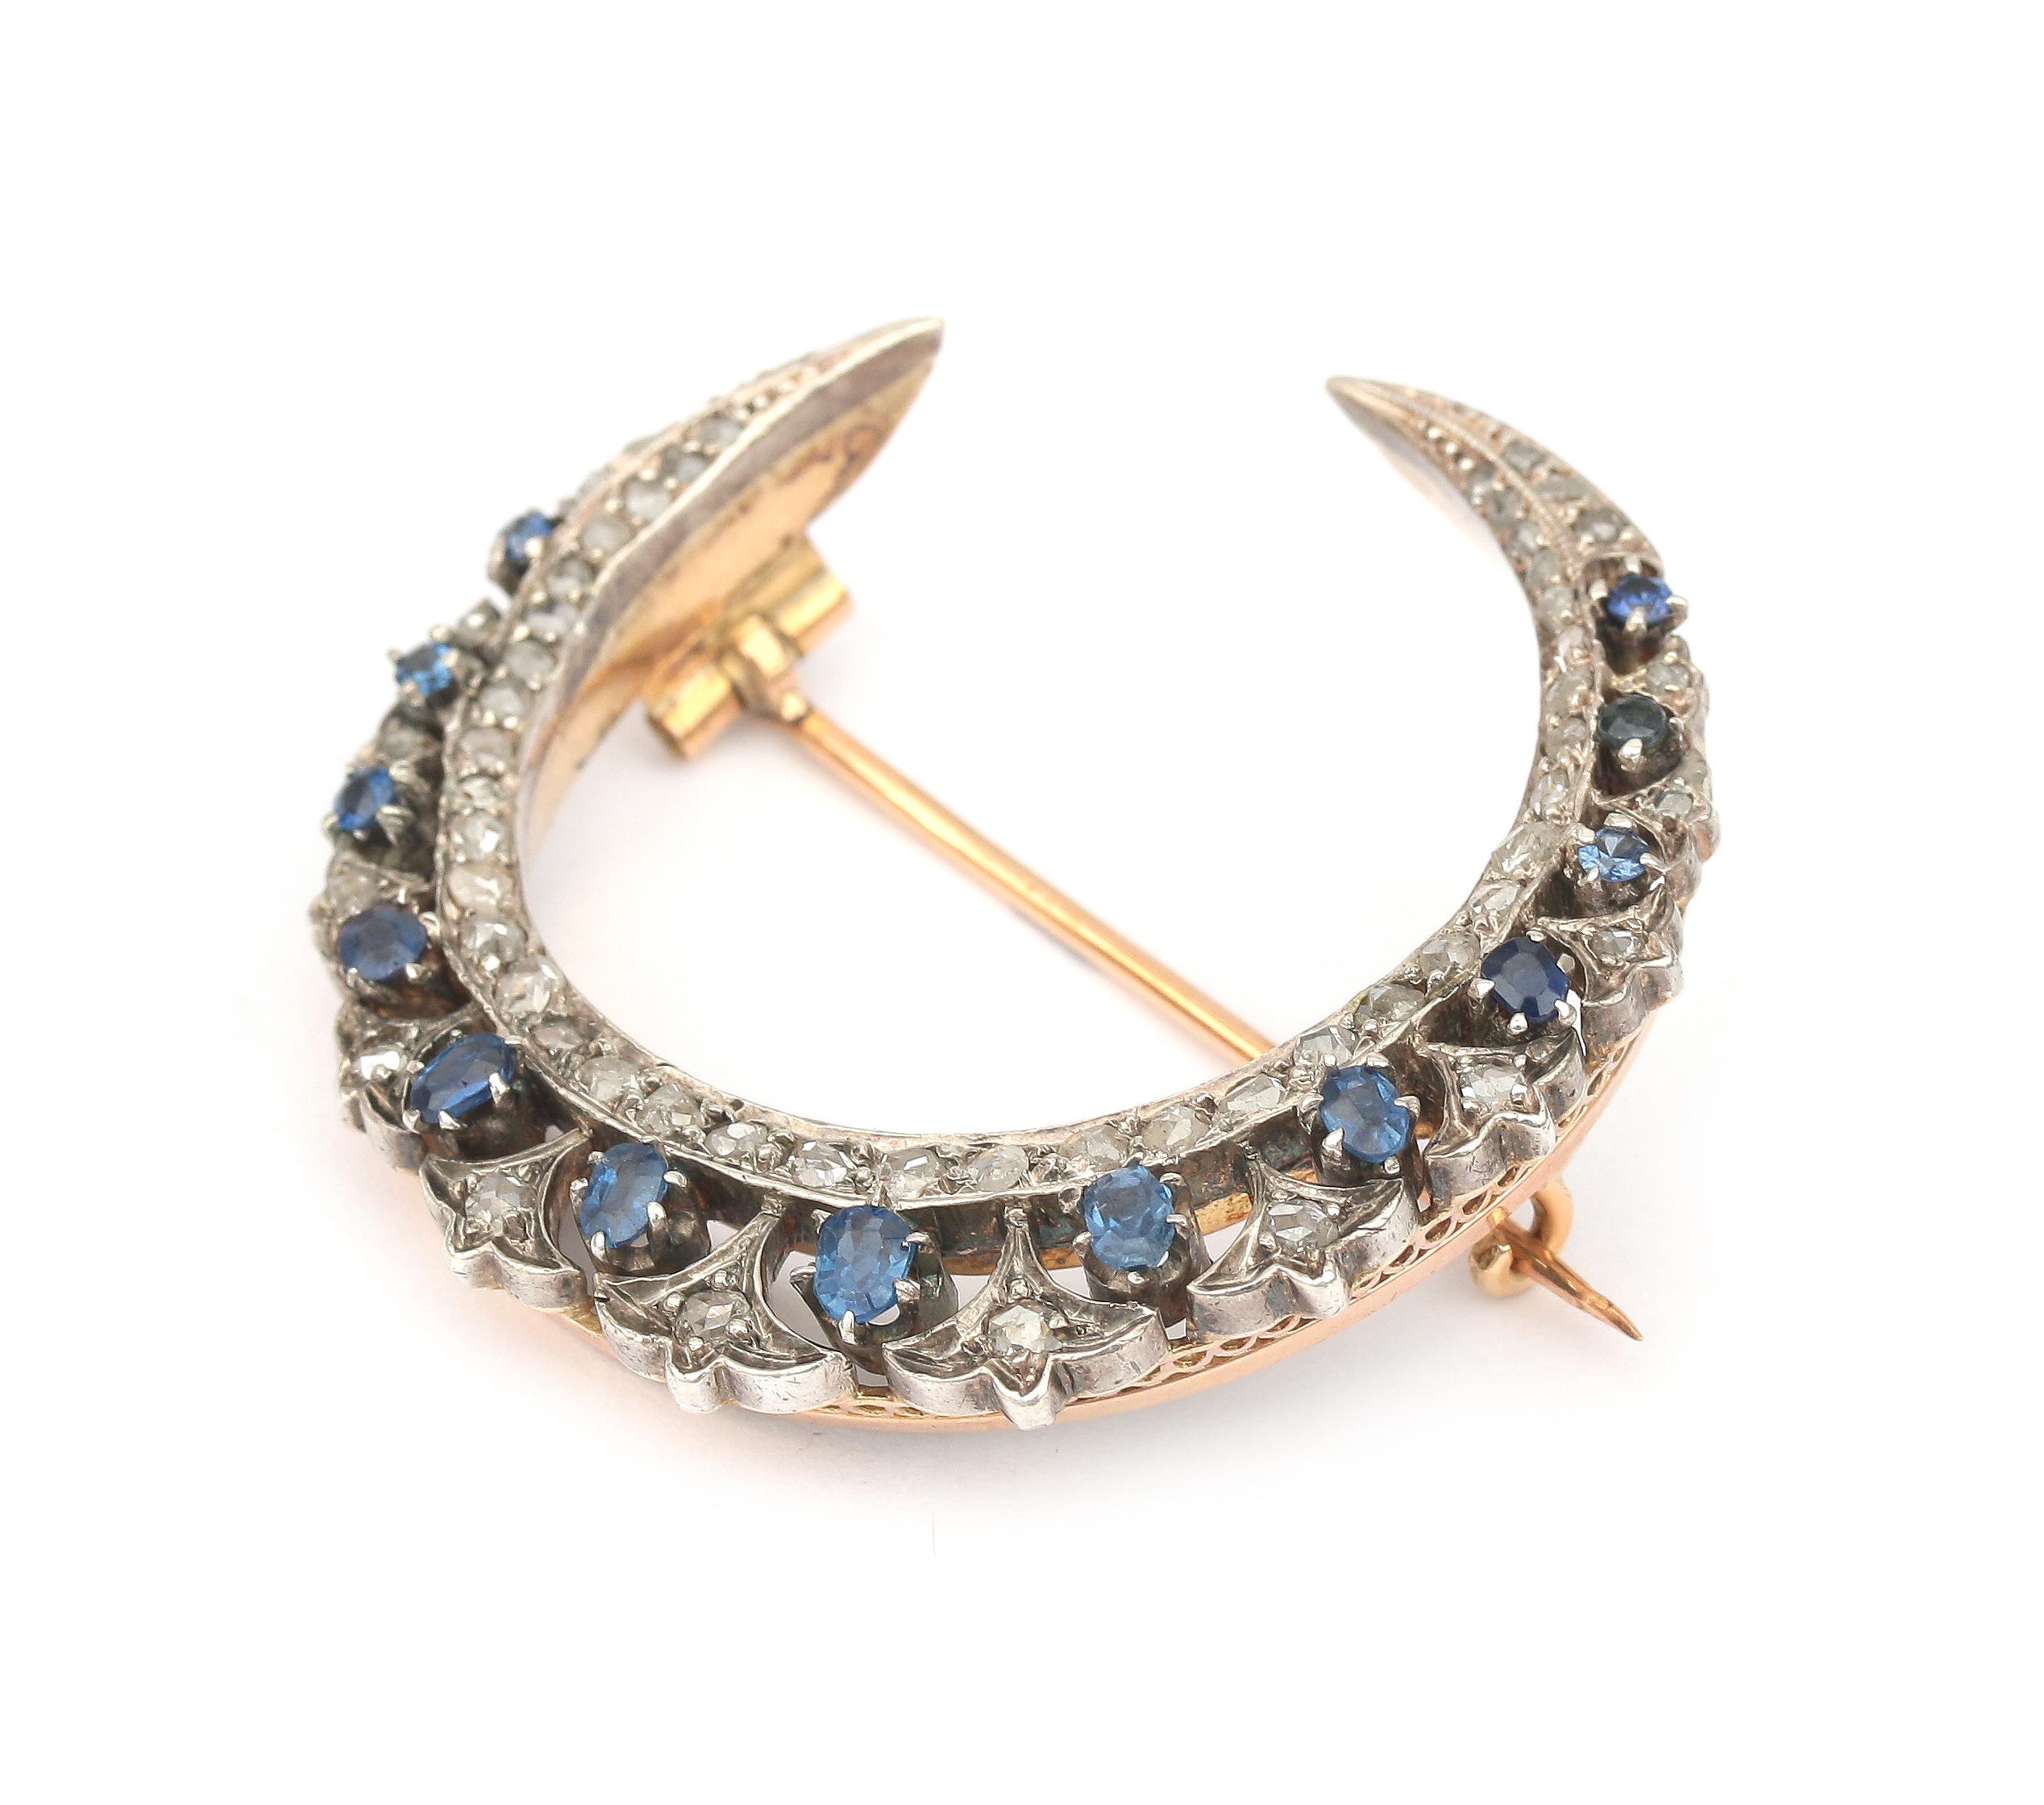 A 14 karat gold and silver sapphire and diamond crescent brooch - Image 2 of 4